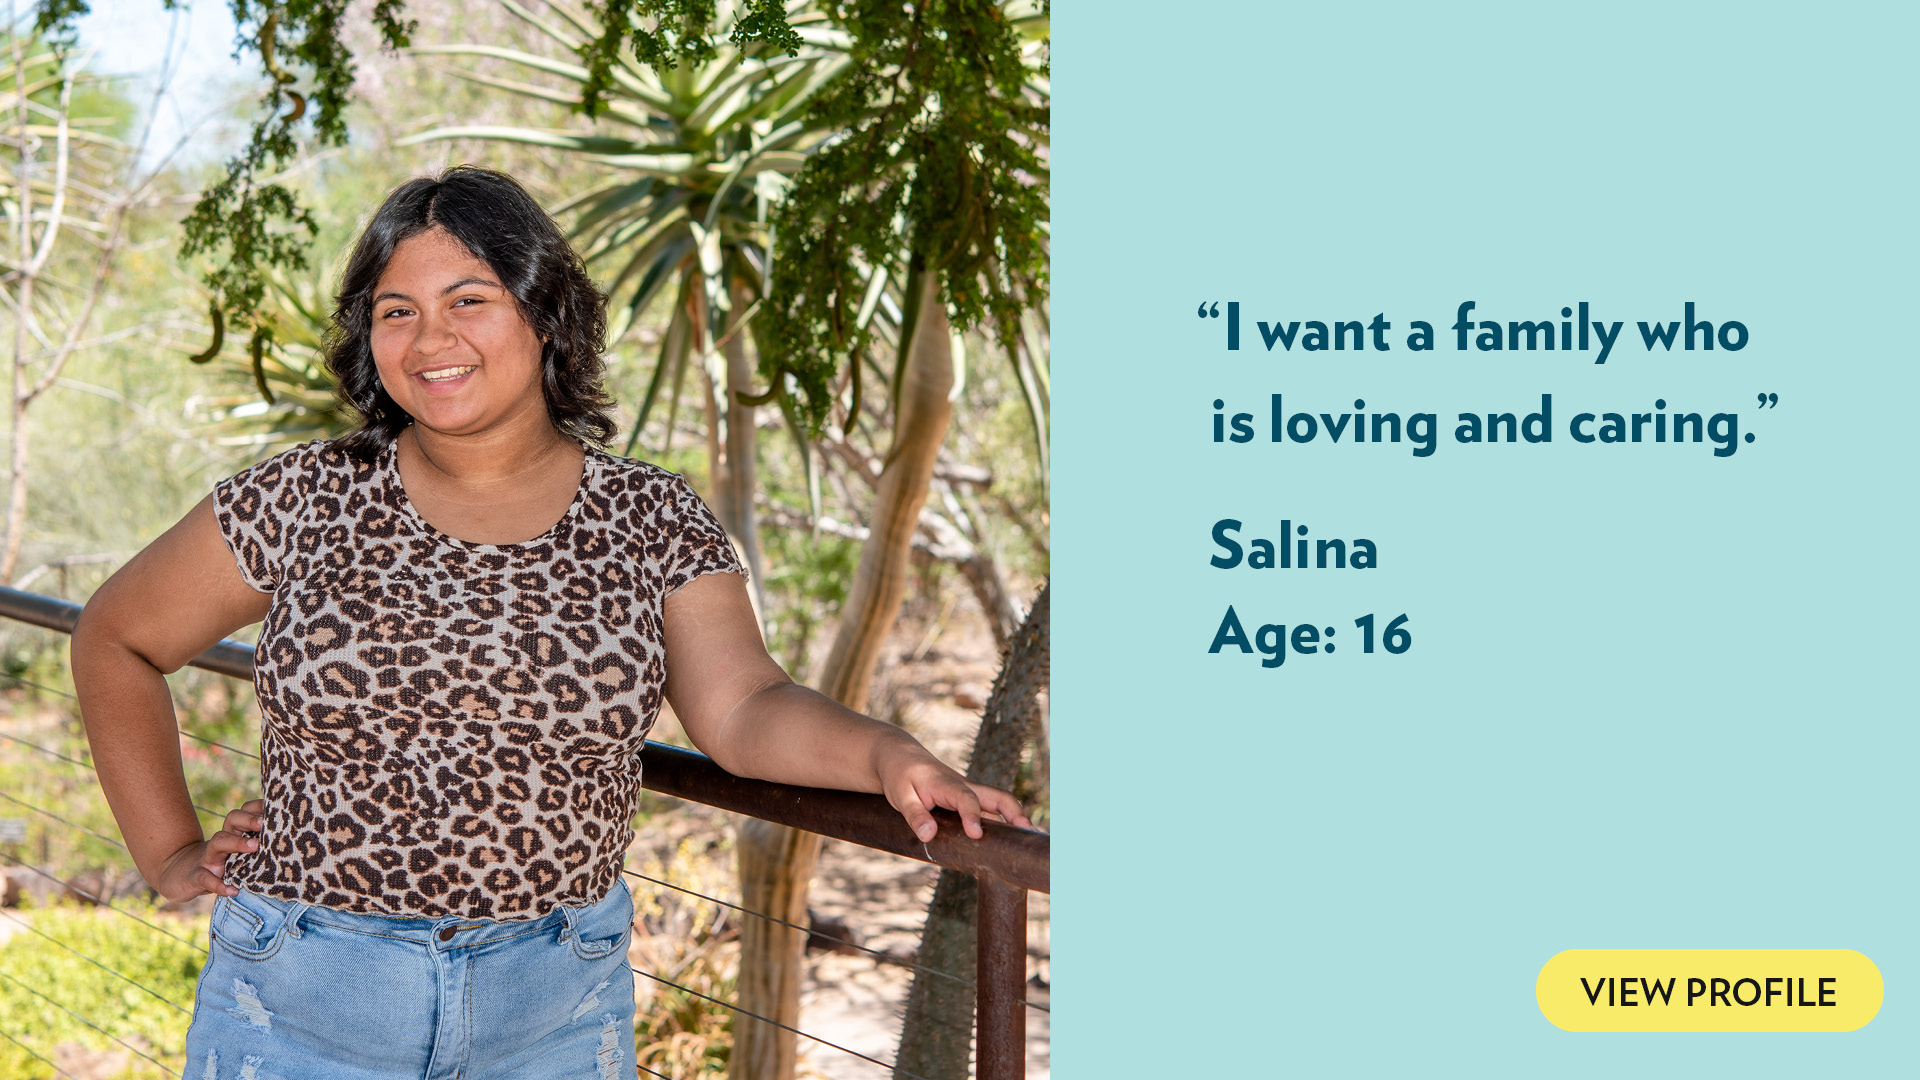 I want a family who is loving and caring. Salina, age 16. View profile.